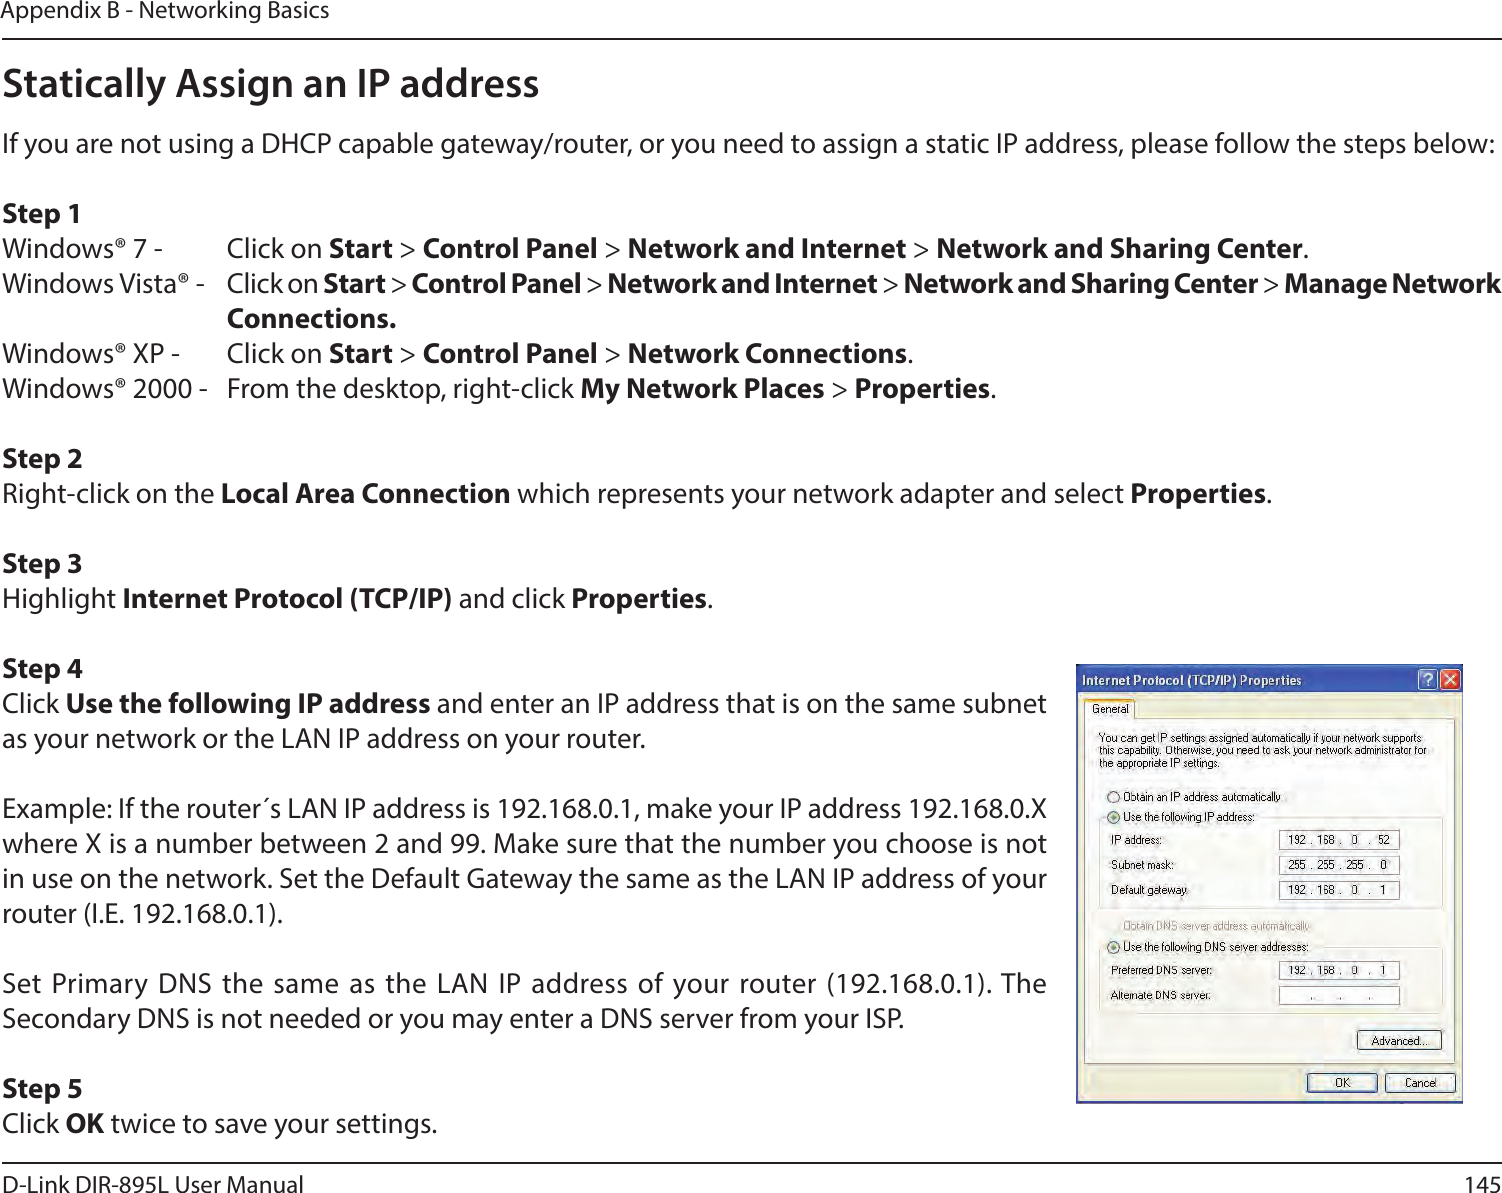 145D-Link DIR-895L User ManualAppendix B - Networking BasicsStatically Assign an IP addressIf you are not using a DHCP capable gateway/router, or you need to assign a static IP address, please follow the steps below:Step 1Windows® 7 -  Click on Start &gt; Control Panel &gt; Network and Internet &gt; Network and Sharing Center.Windows Vista® -  Click on Start &gt; Control Panel &gt; Network and Internet &gt; Network and Sharing Center &gt; Manage Network    Connections.Windows® XP -  Click on Start &gt; Control Panel &gt; Network Connections.Windows® 2000 -  From the desktop, right-click My Network Places &gt; Properties.Step 2Right-click on the Local Area Connection which represents your network adapter and select Properties.Step 3Highlight Internet Protocol (TCP/IP) and click Properties.Step 4Click Use the following IP address and enter an IP address that is on the same subnet as your network or the LAN IP address on your router. Example: If the router´s LAN IP address is 192.168.0.1, make your IP address 192.168.0.X where X is a number between 2 and 99. Make sure that the number you choose is not in use on the network. Set the Default Gateway the same as the LAN IP address of your router (I.E. 192.168.0.1). Set Primary DNS the same as the LAN IP address of your router (192.168.0.1). The Secondary DNS is not needed or you may enter a DNS server from your ISP.Step 5Click OK twice to save your settings.